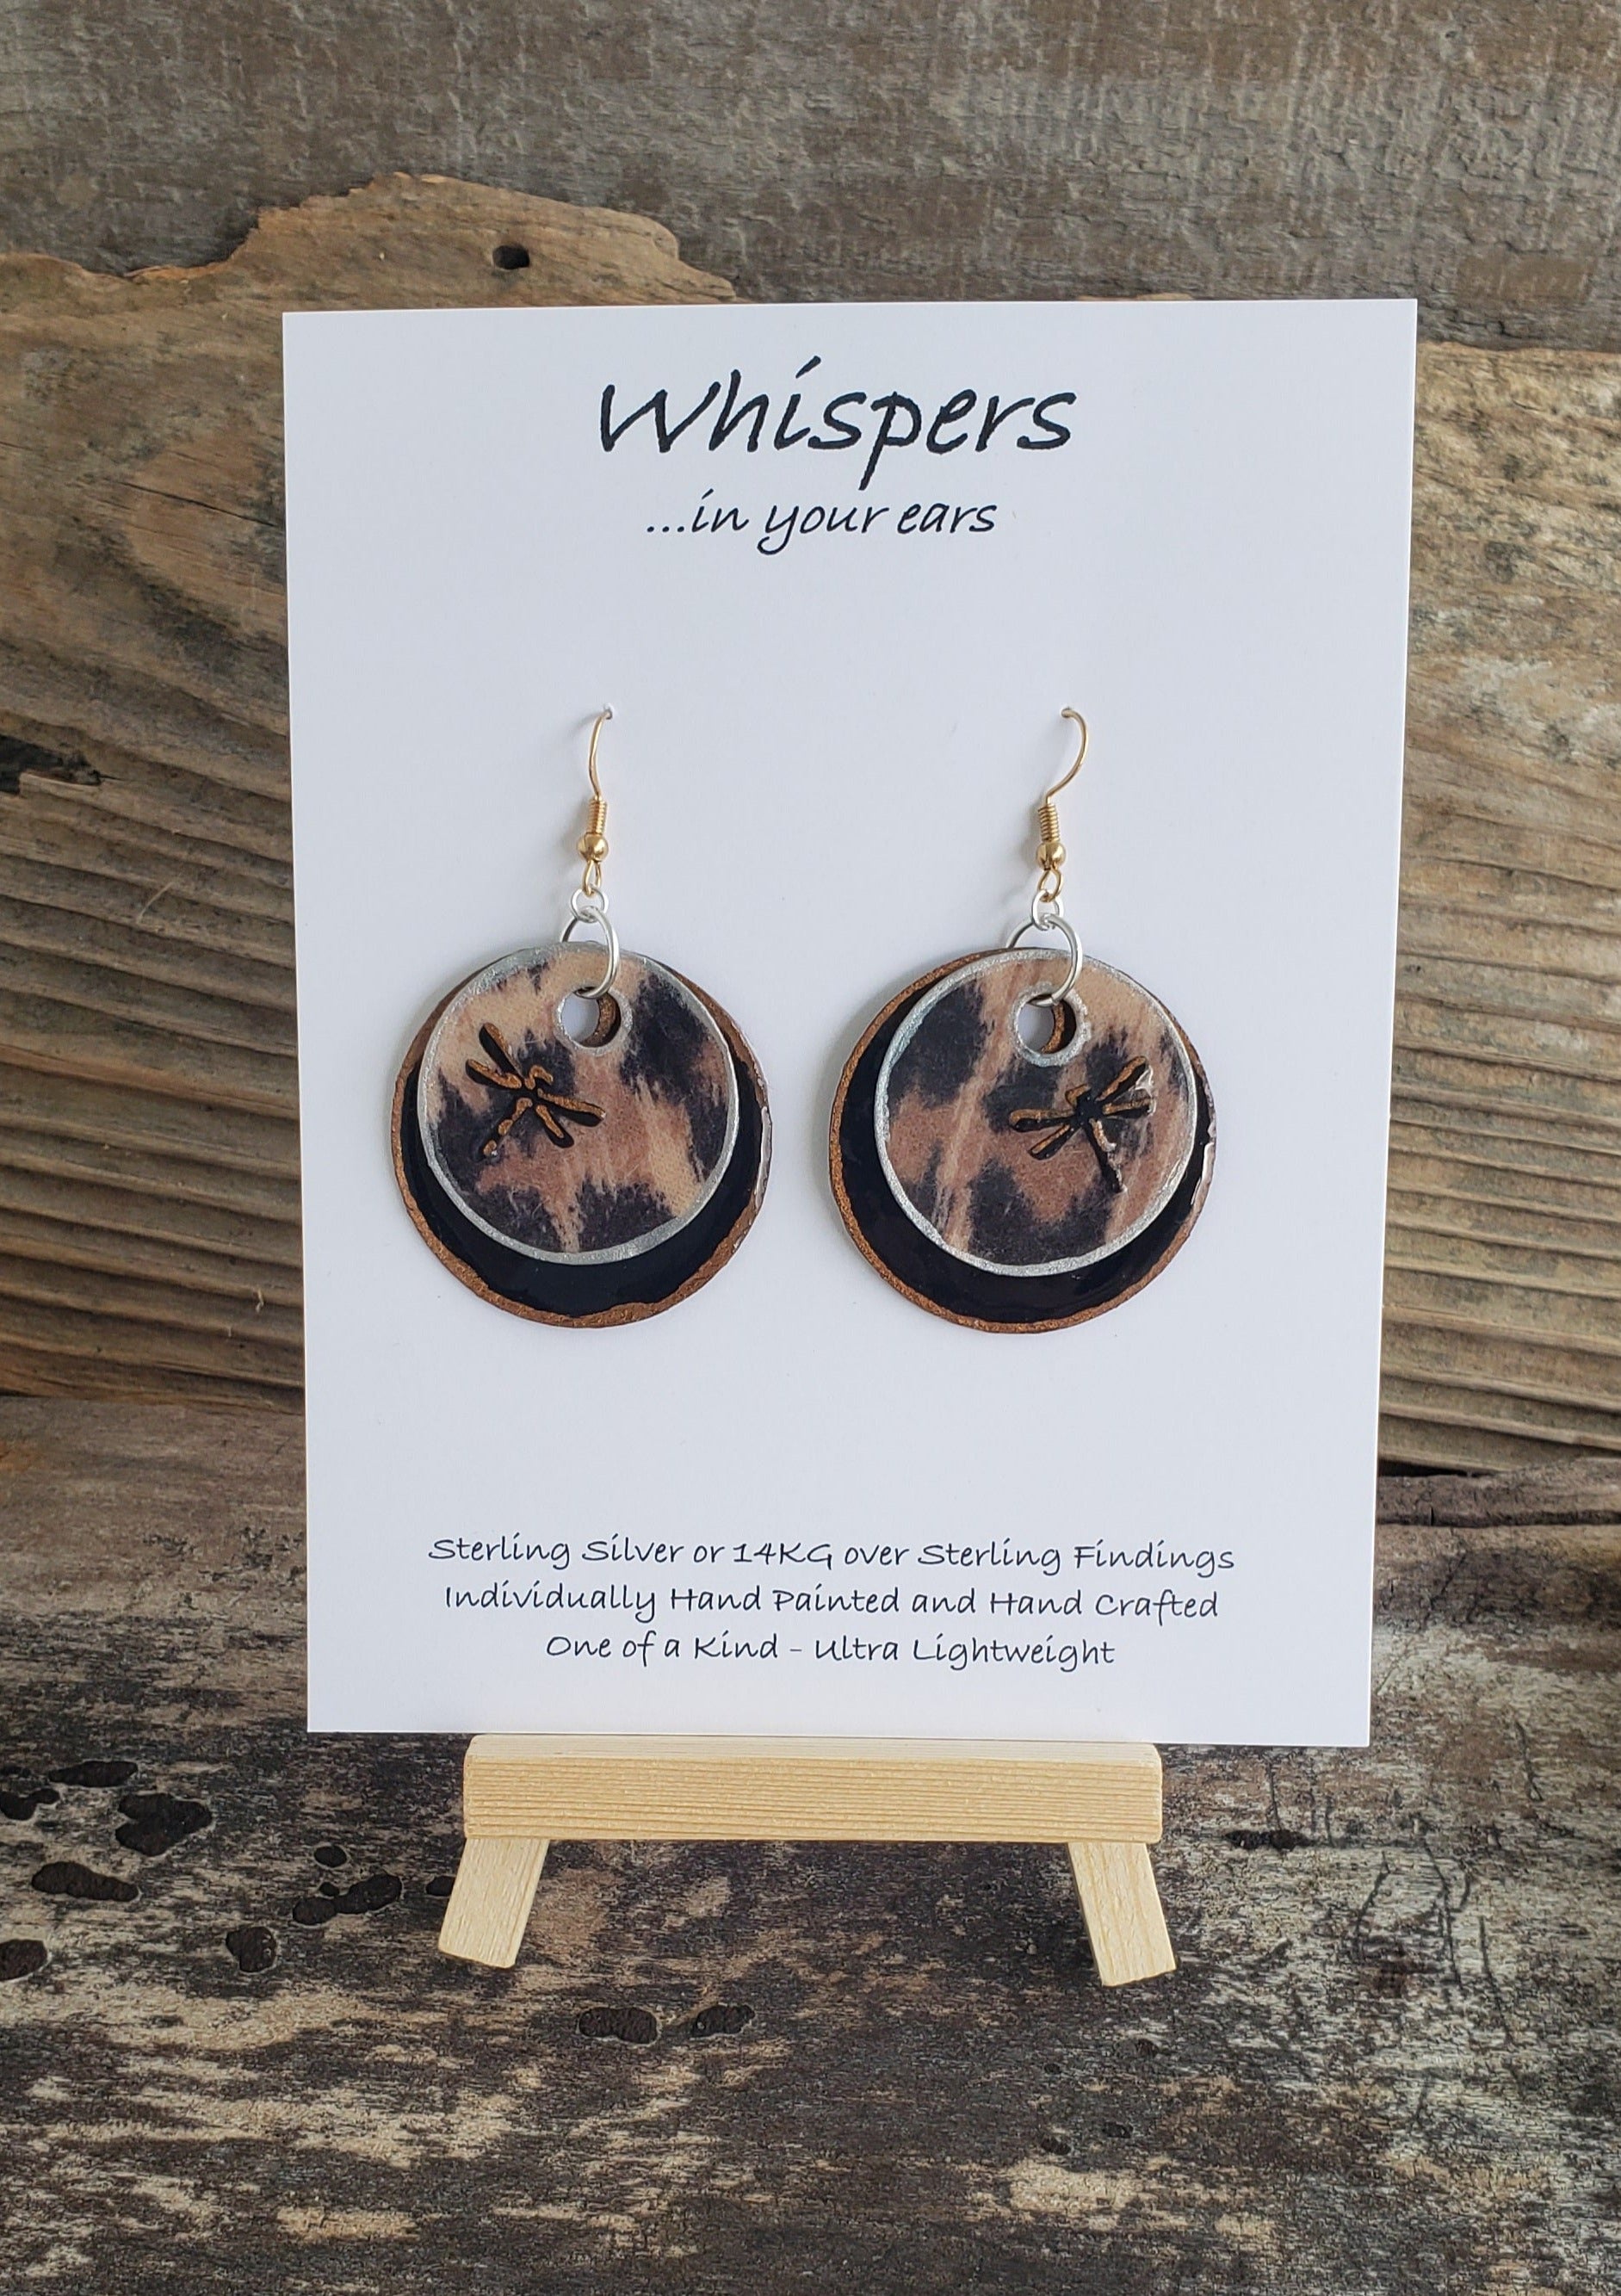 Hand painted ultra lightweight paper earrings. 3D Dragonfly accented cheetah print. Double layer gold and silver painted edge accents.  Back is painted black.  Circular in shape. Sterling Silver and 14kg over silver findings.  Hangs 1 1/2" in Length